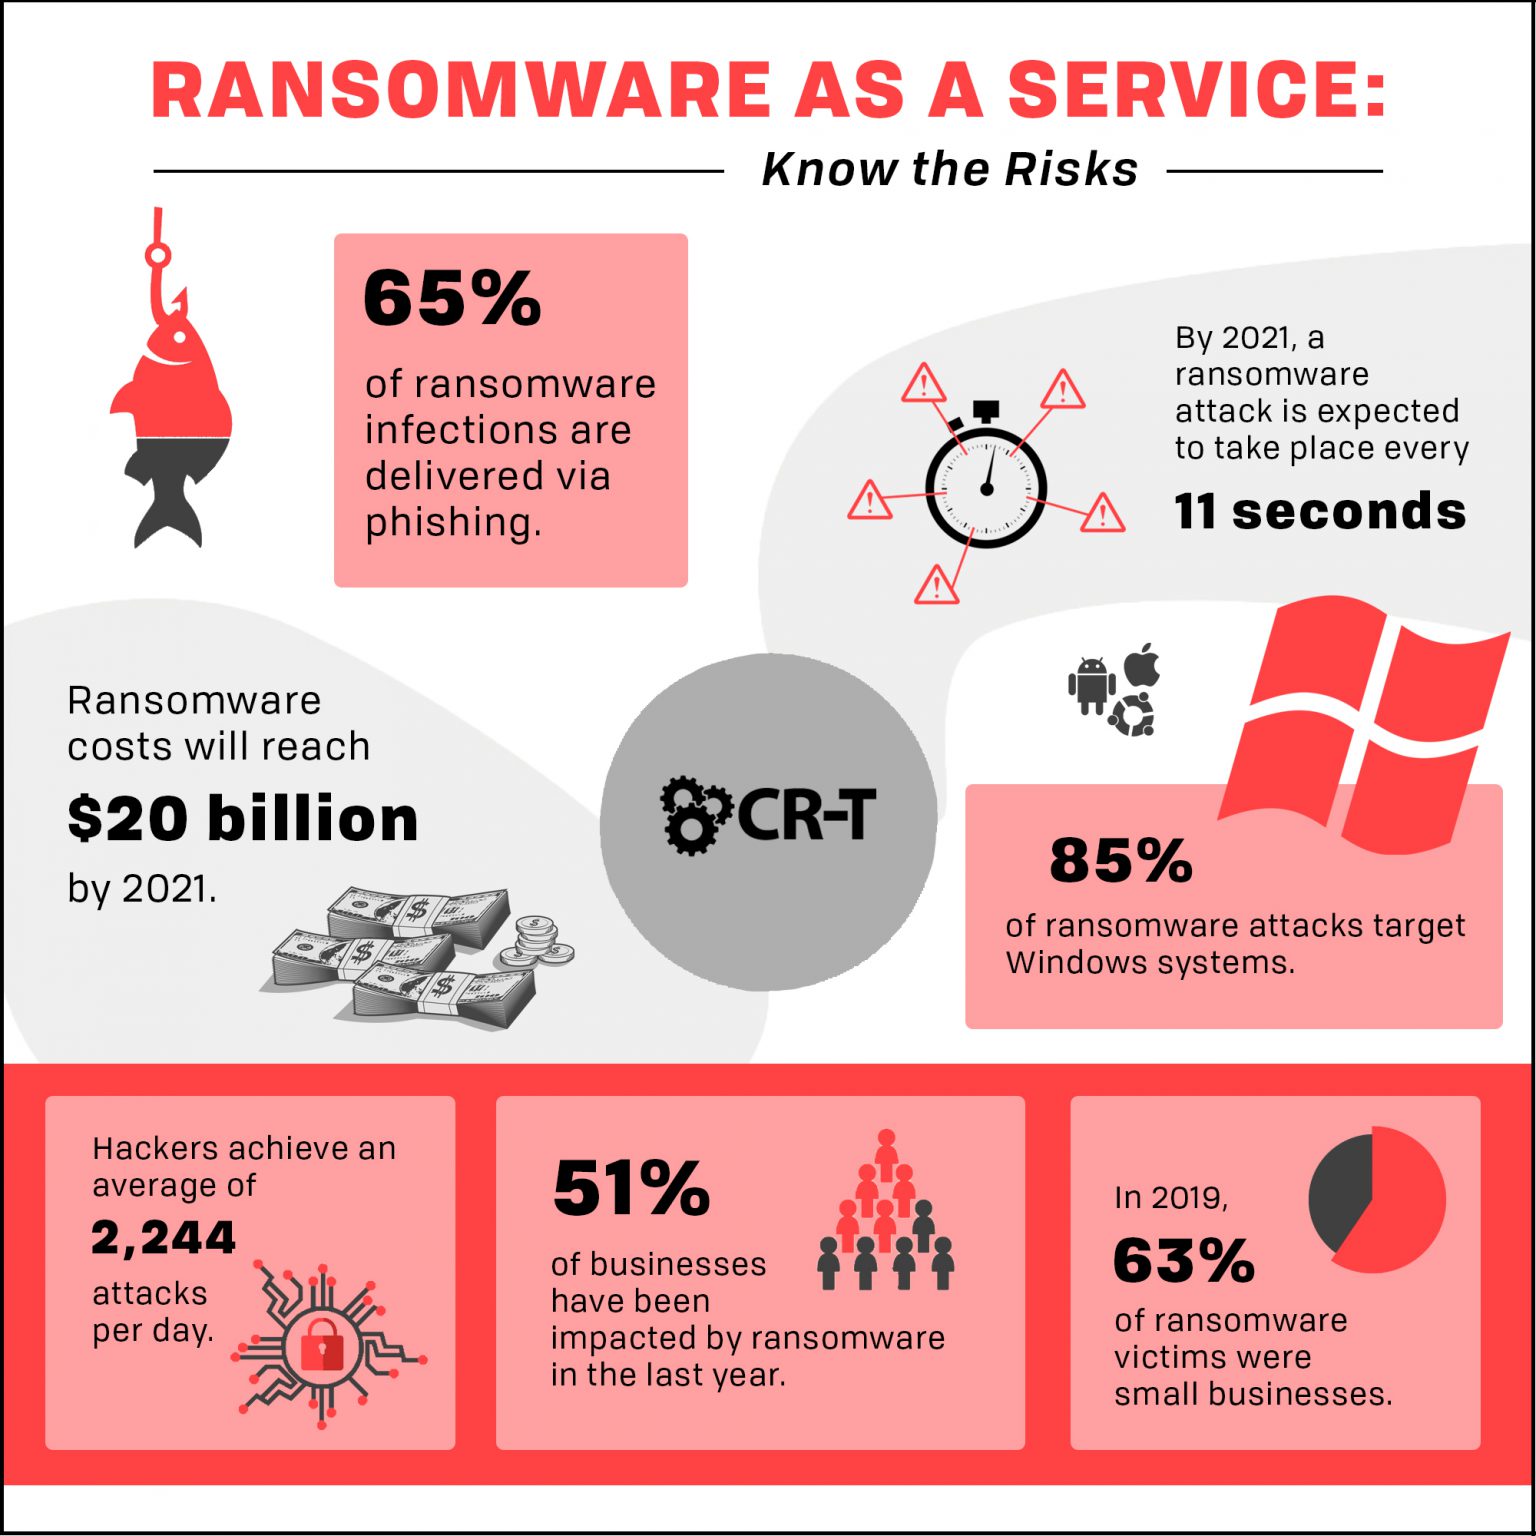 Ransomware as a Service Know the Risks IT Services CRT Utah